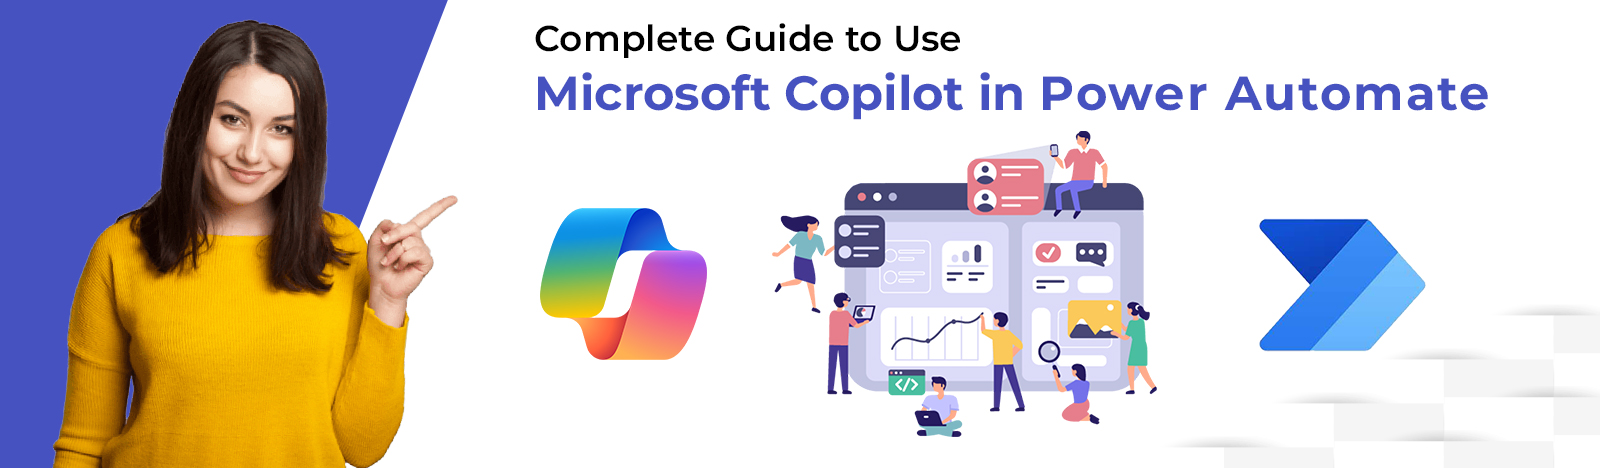 Complete Guide to Use Microsoft Copilot in Power Automate